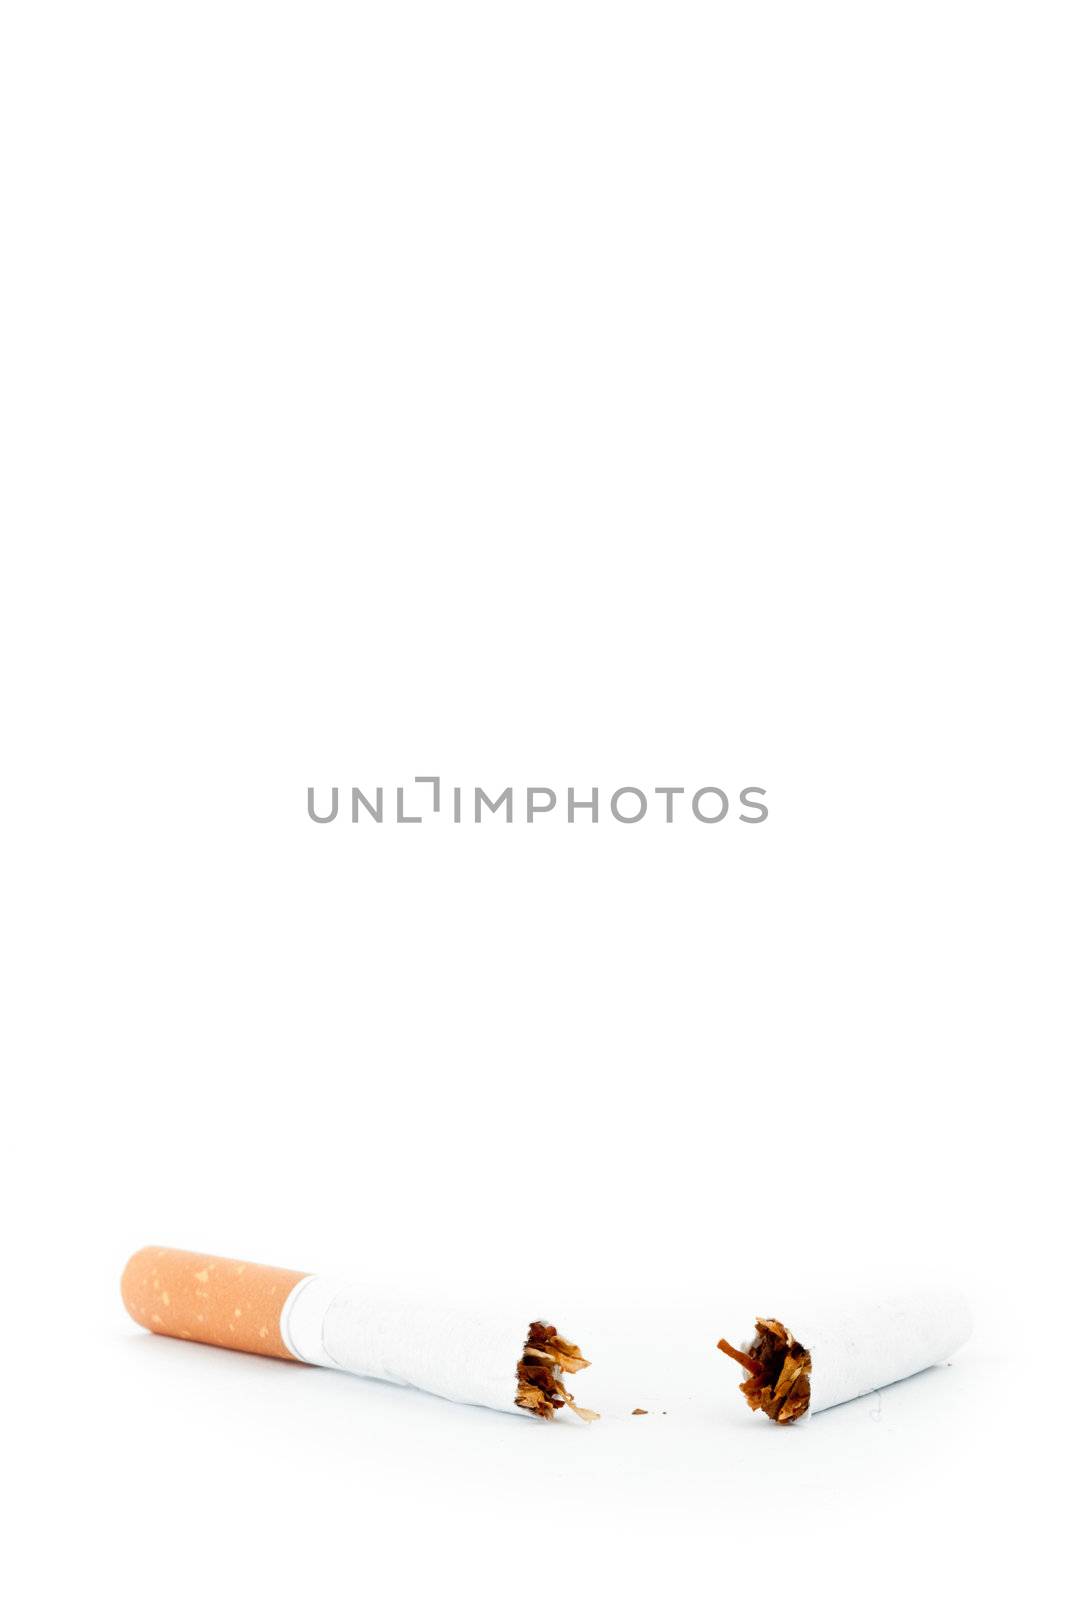 Close up of a cigarette broken against a white background